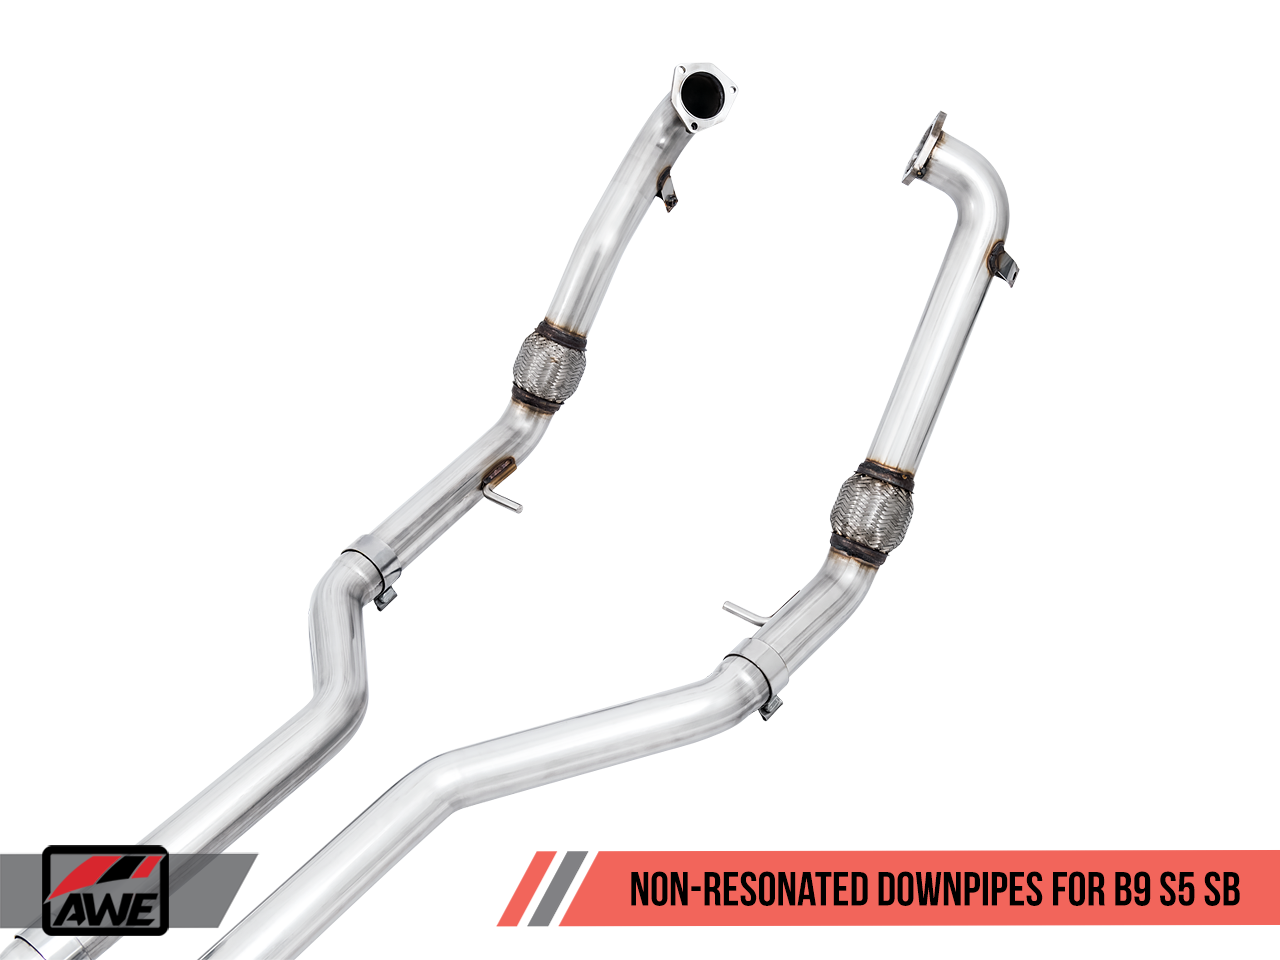 AWE Touring Edition Exhaust for Audi B9 S5 Sportback - Non-Resonated - Motorsports LA